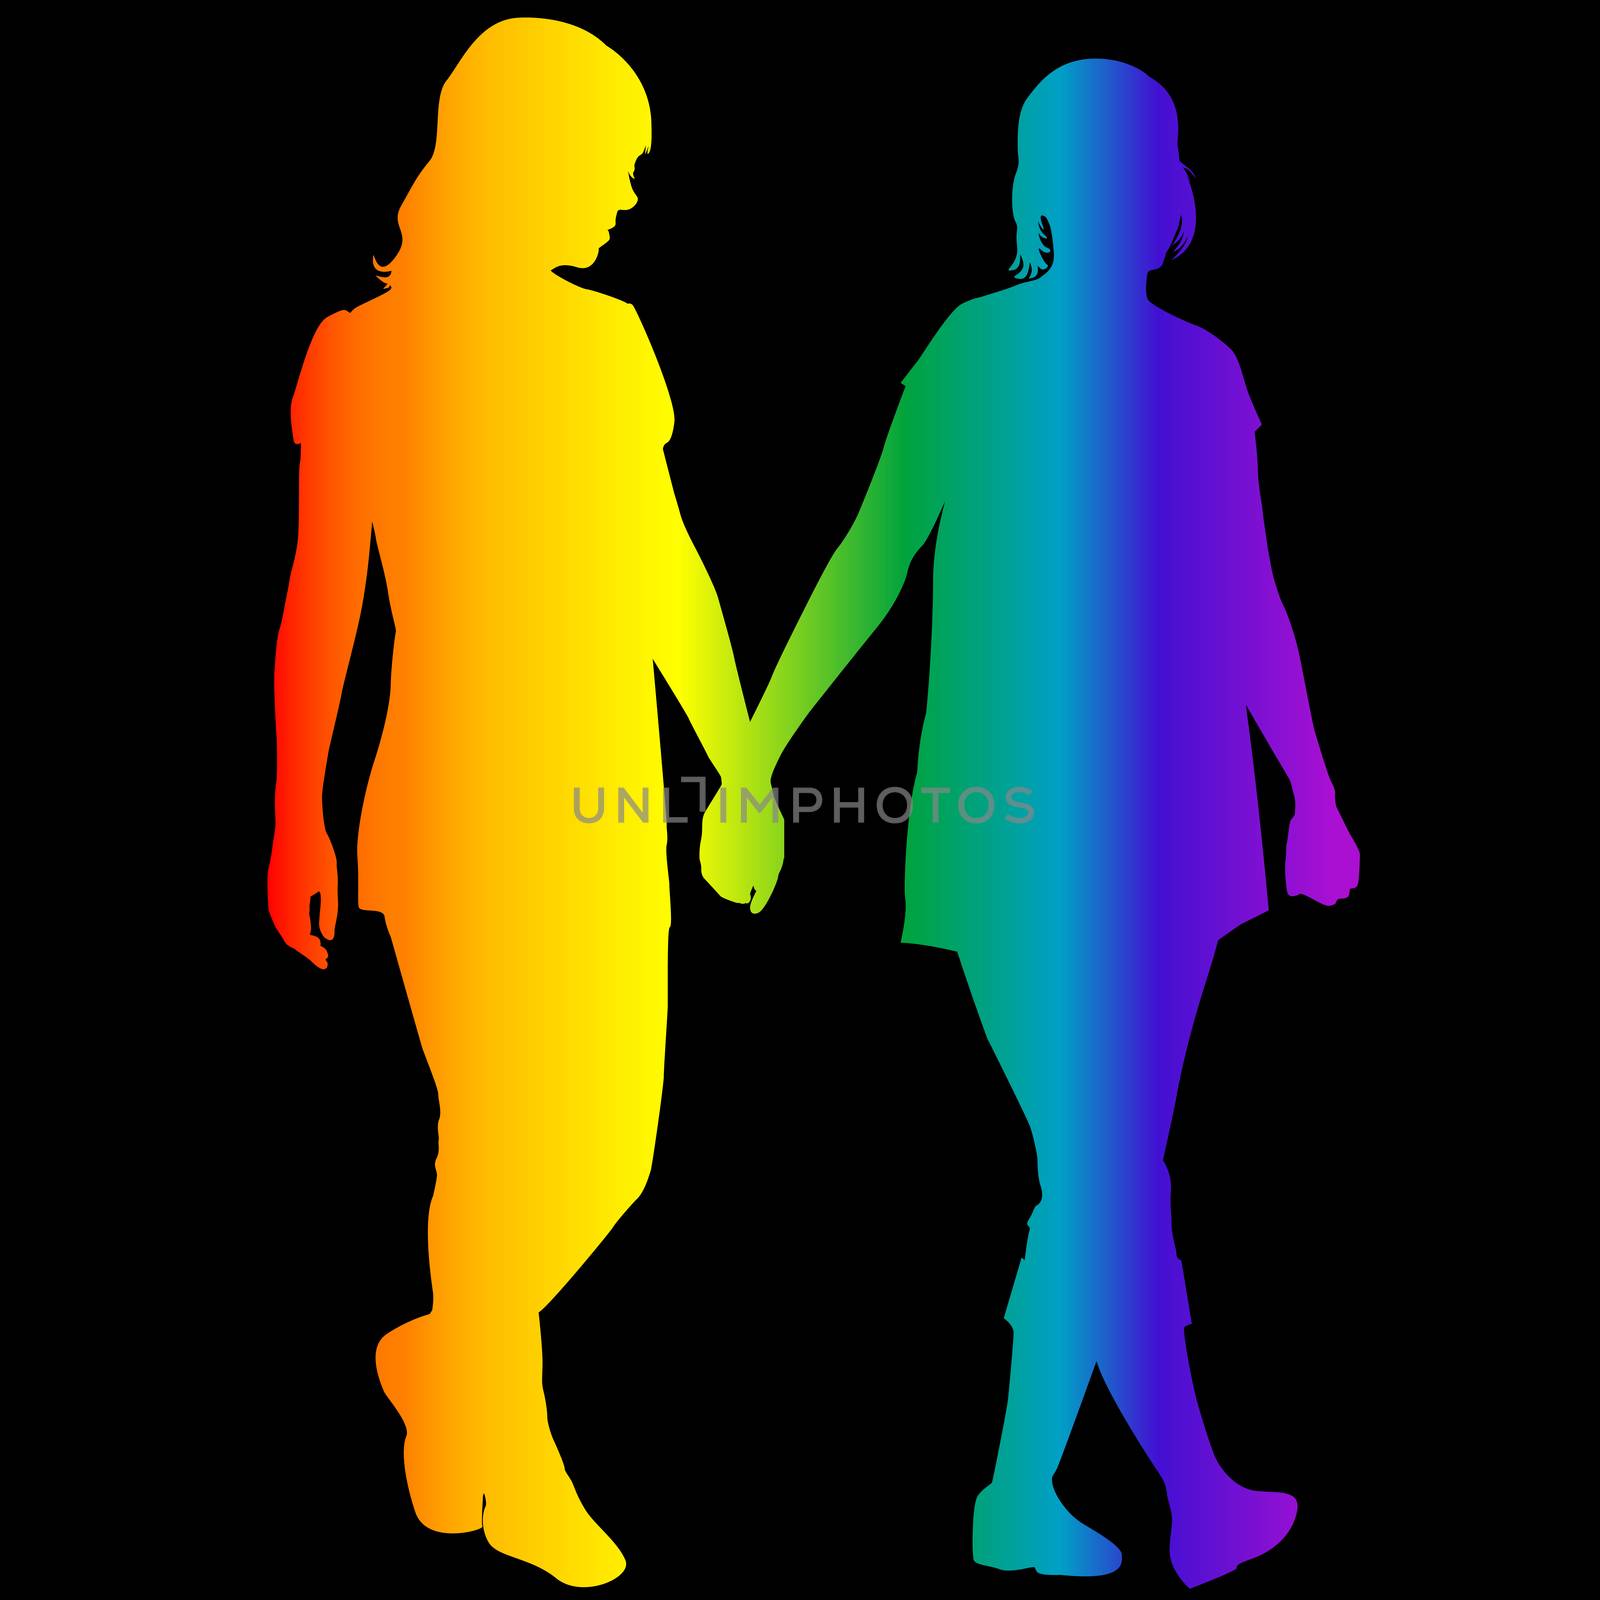 Lesbian women silhouettes in rainbow colors by hibrida13